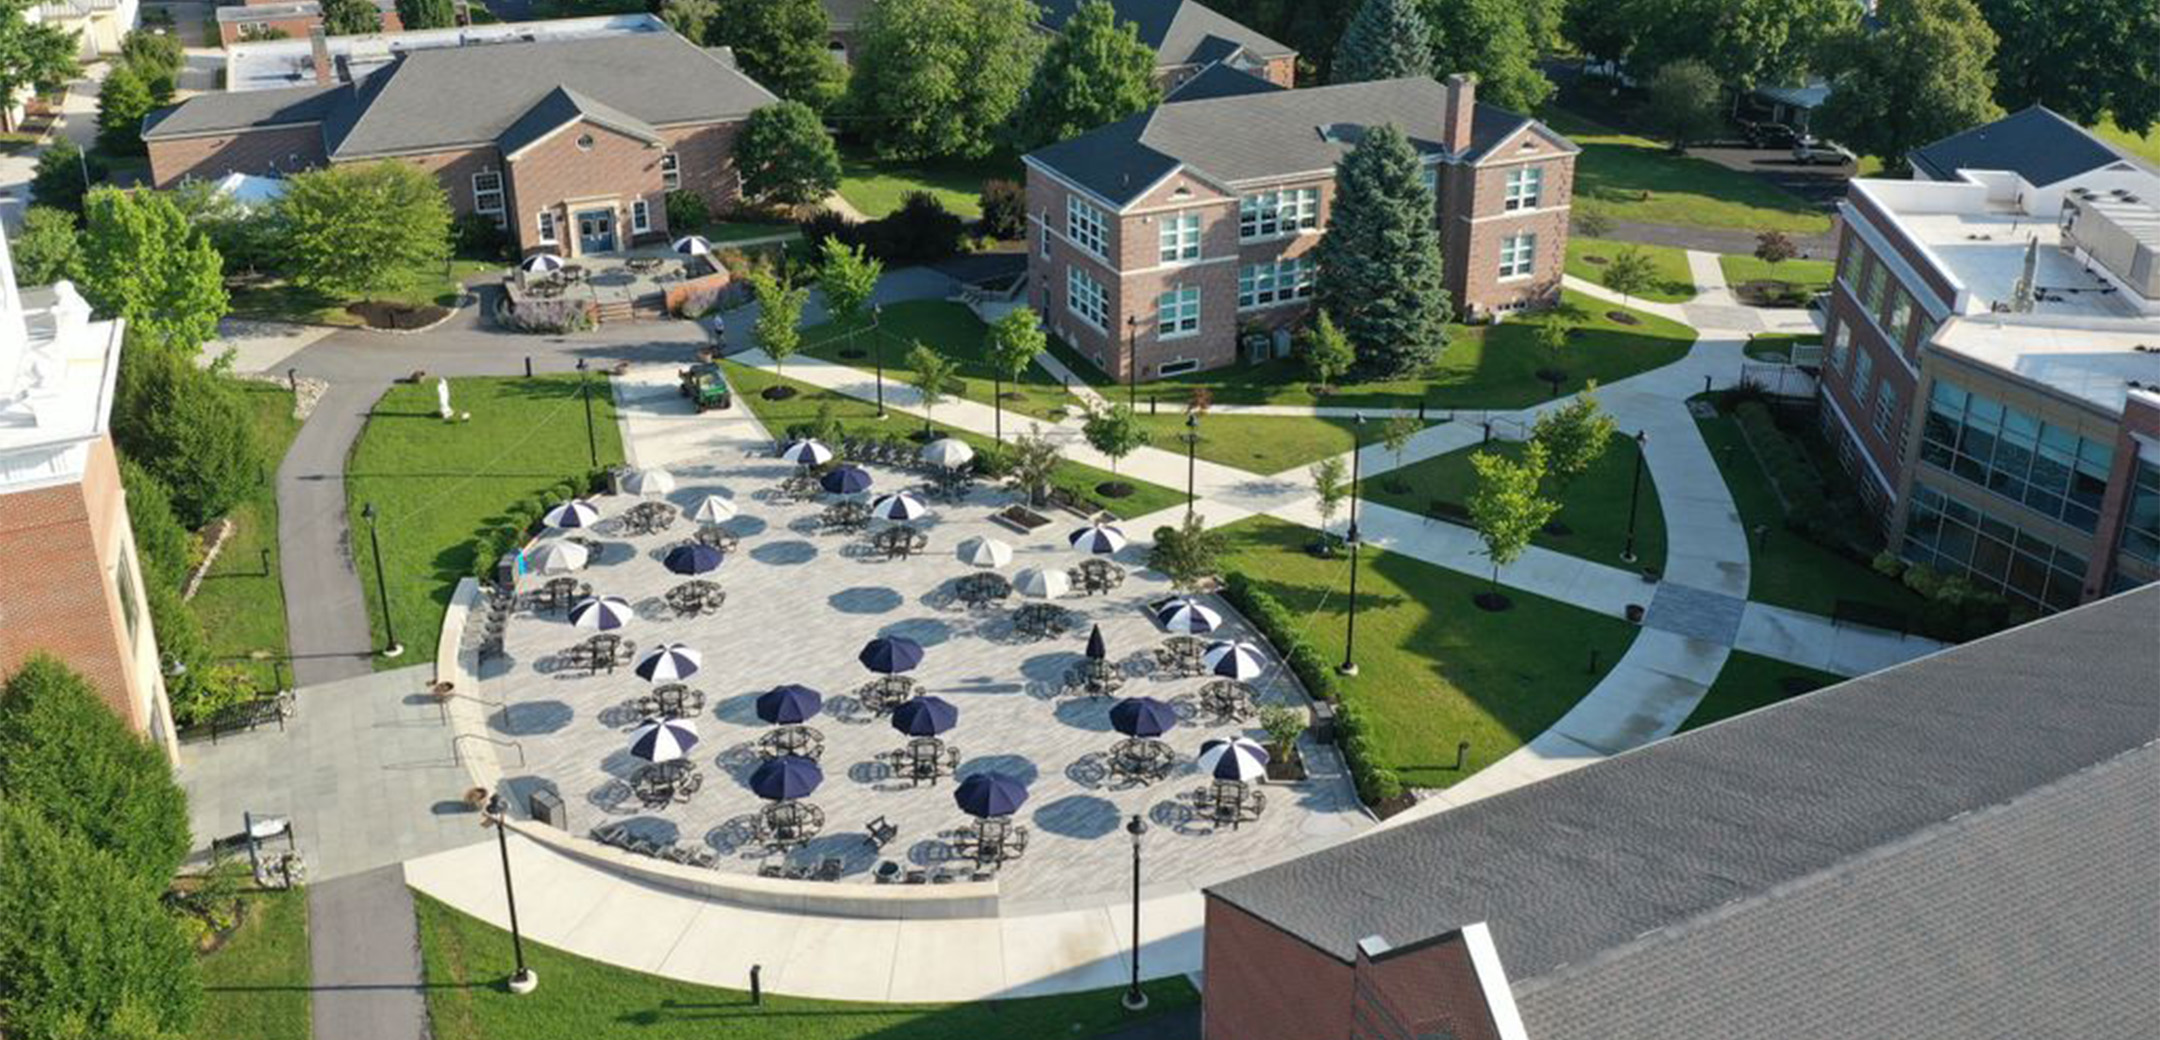 An aerial view of Malvern Preparatory School's Campus showcasing the courtyard with tables and chairs surrounding by brick buildings